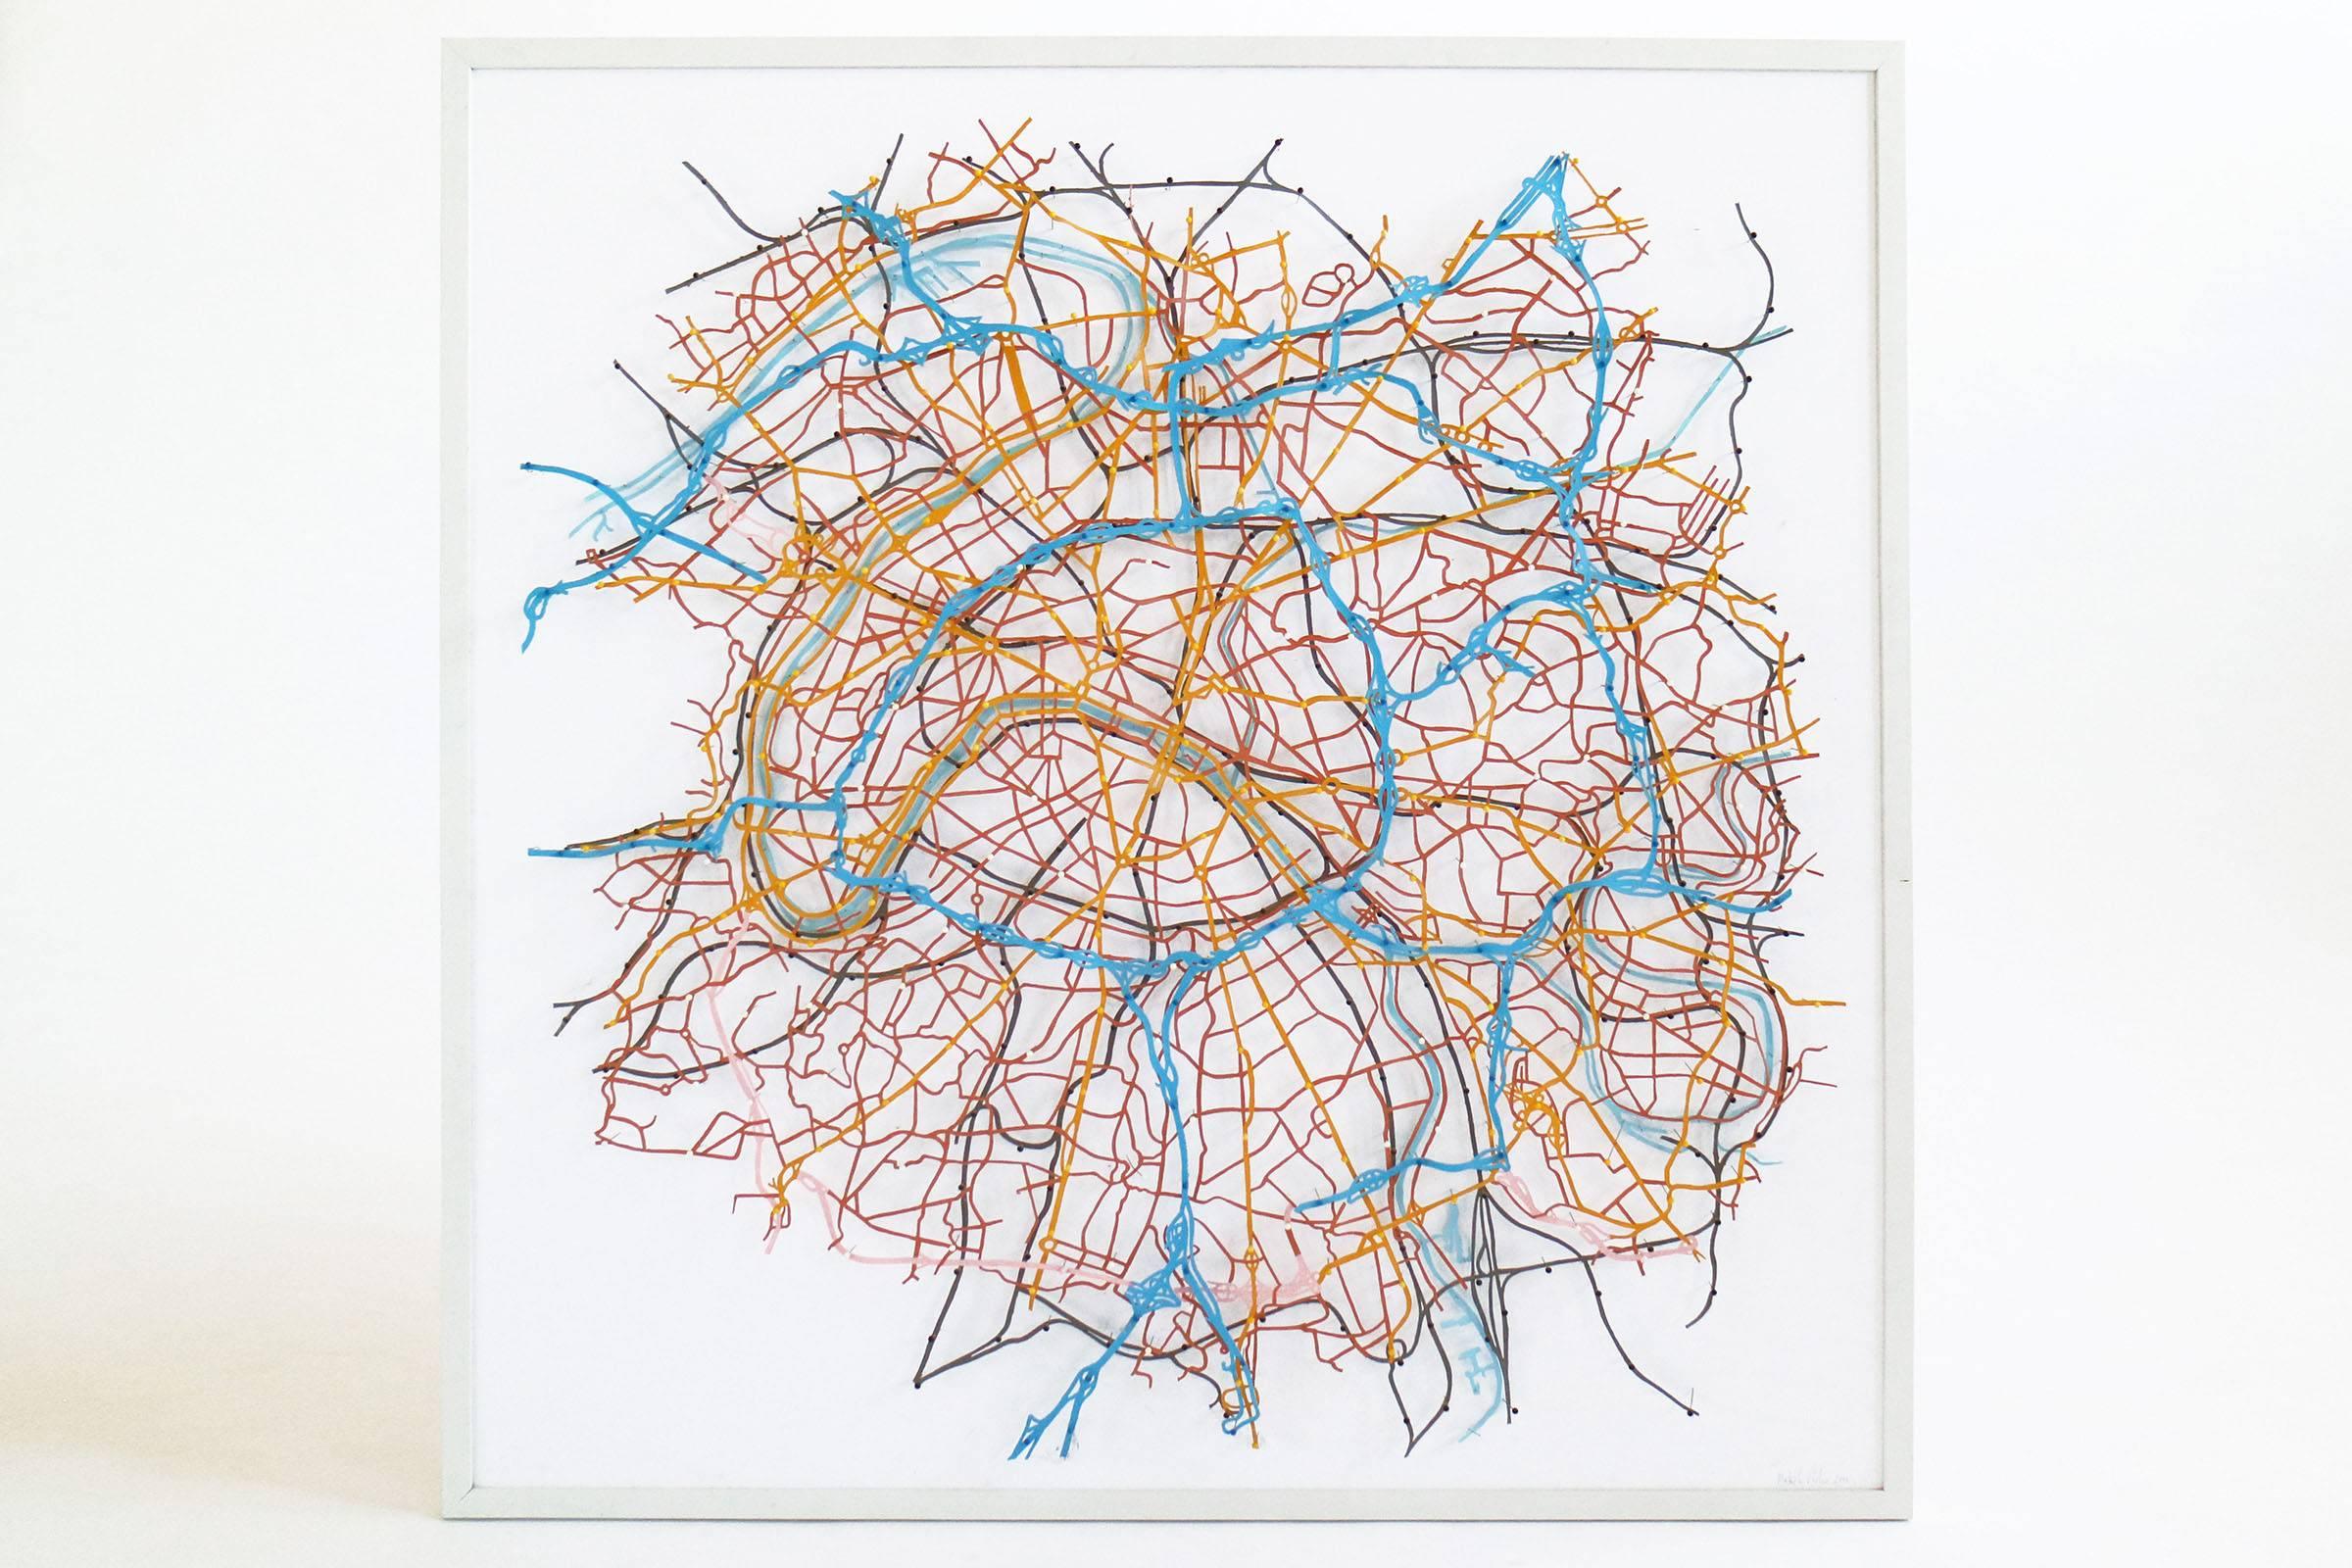 Artwork depicting city map of greater Paris. Picton considers his work sculptural, 